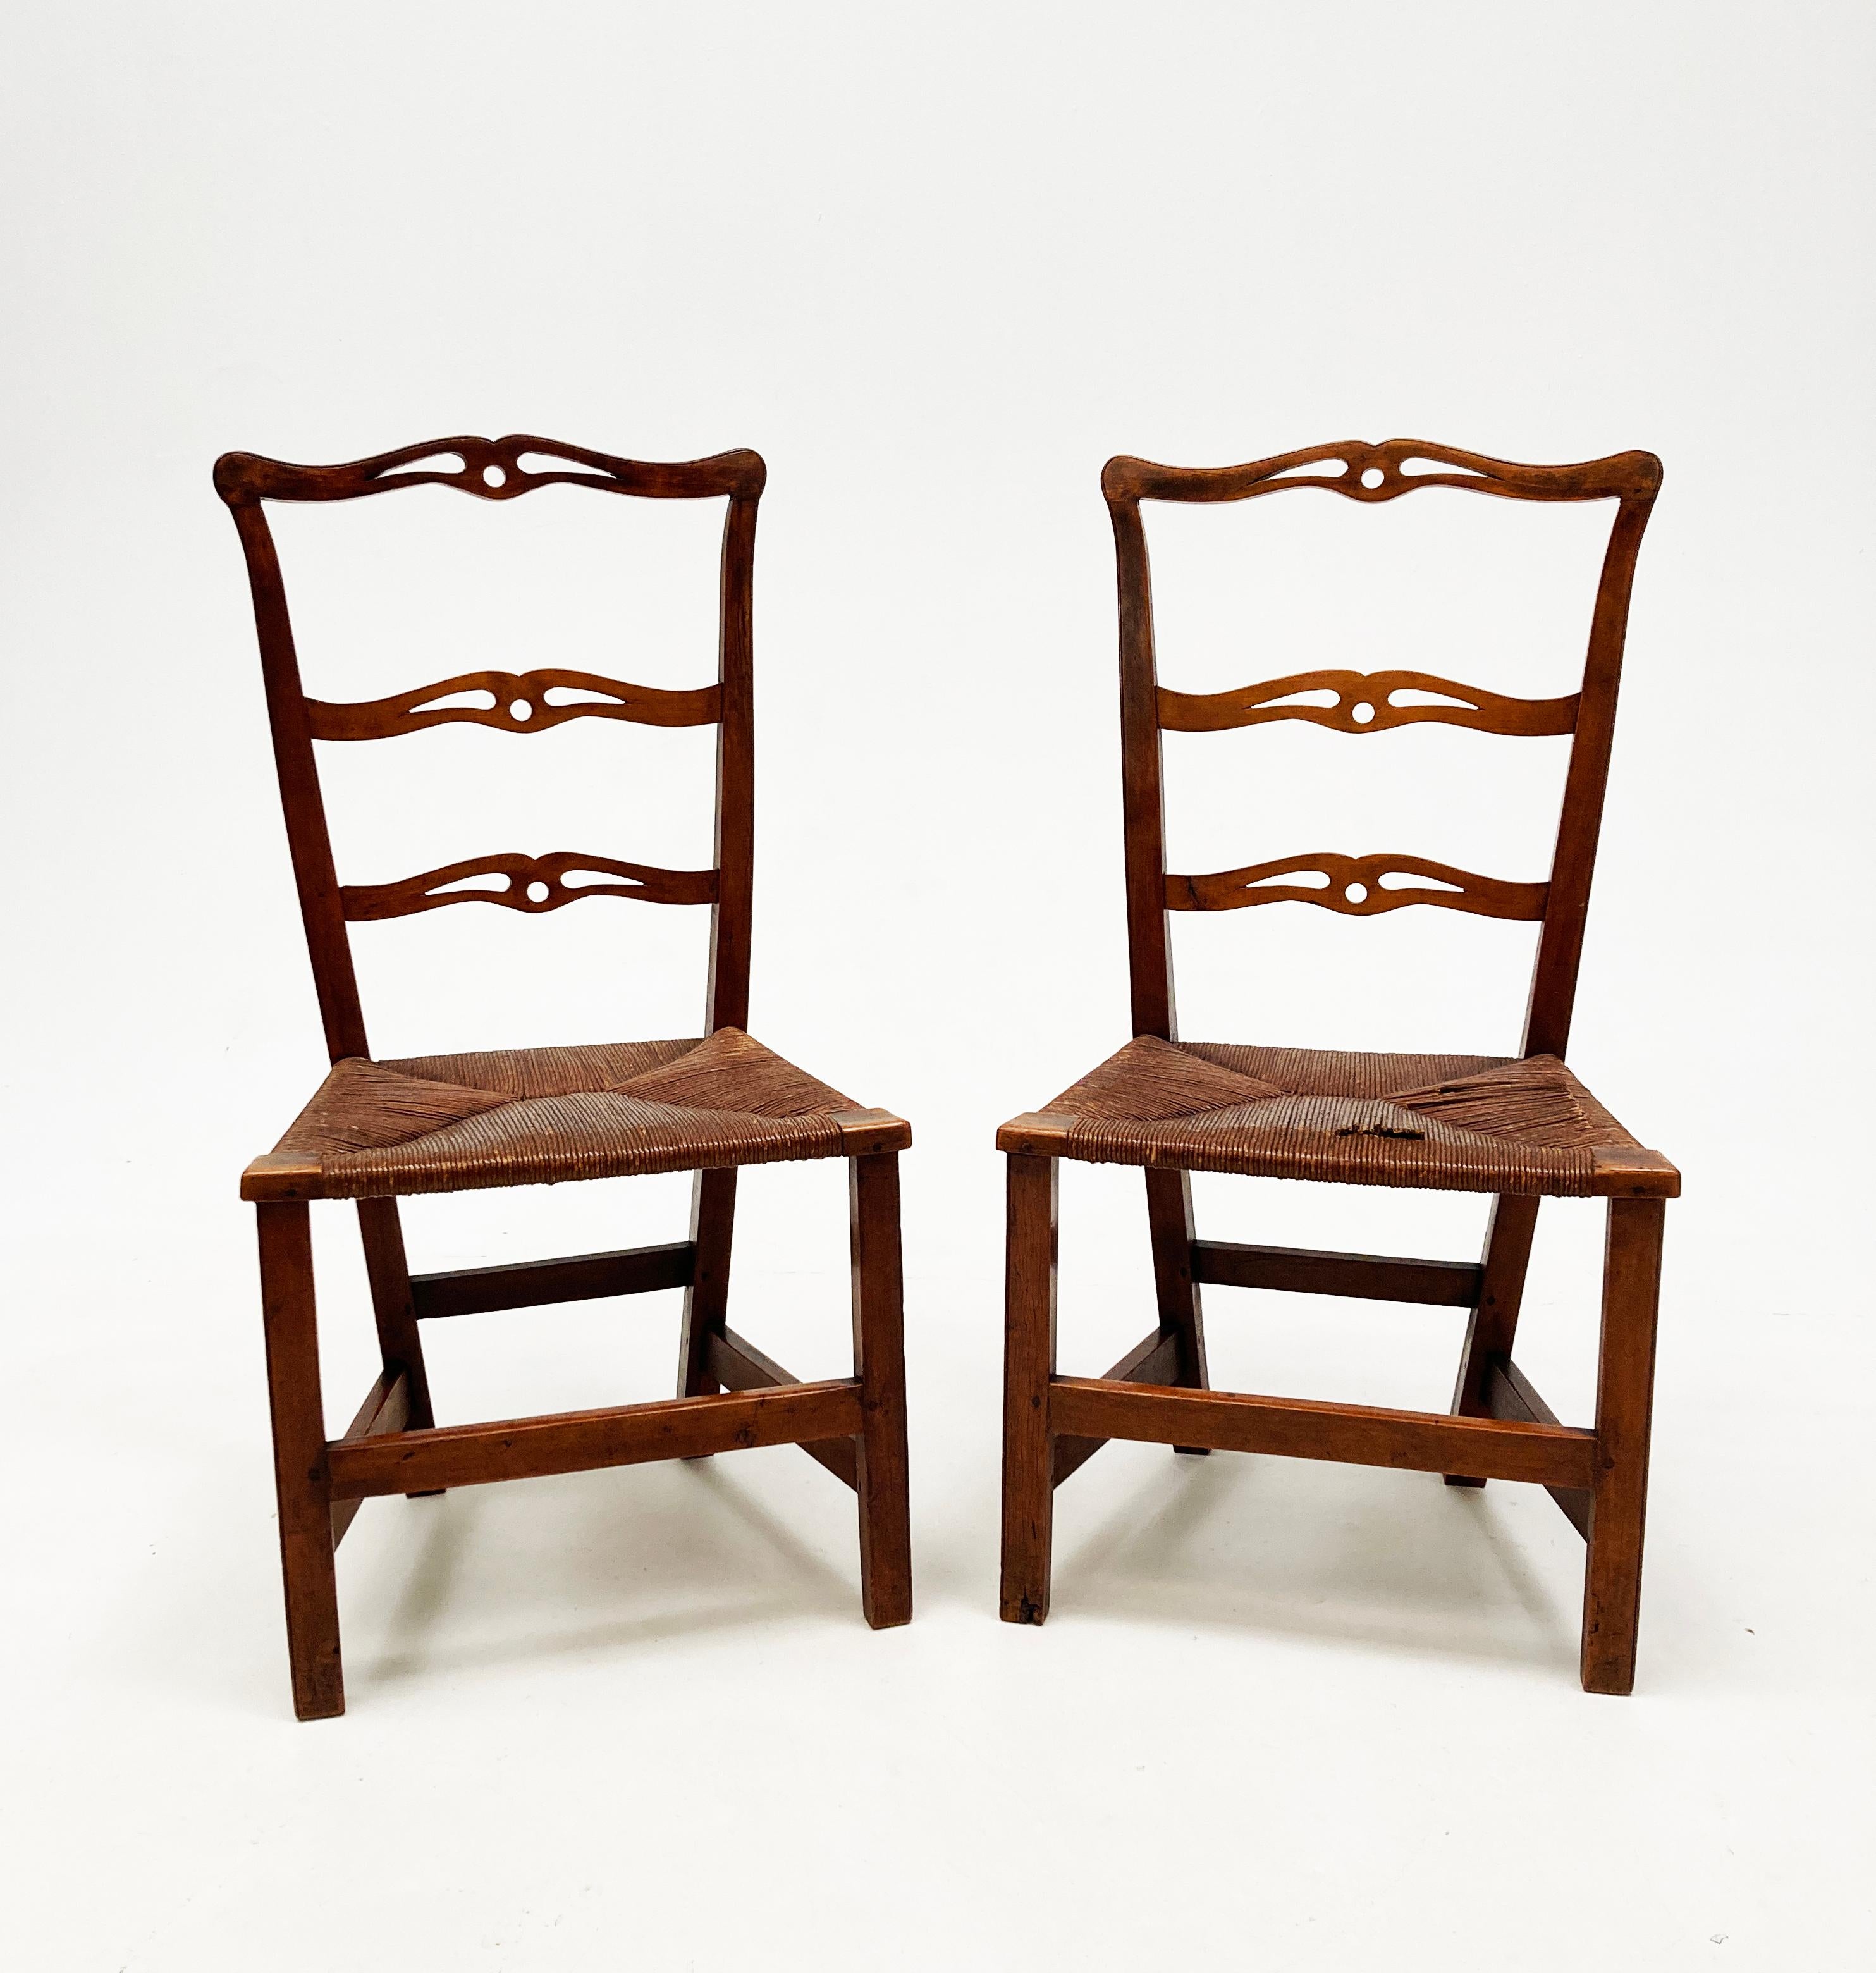 If these two chairs could speak, the history they might share. These rare and very early chairs are hand-carved and constructed in a refined primitive country design, reflective of the era. Utilizing a stunning, rich maple, the top rails and cross